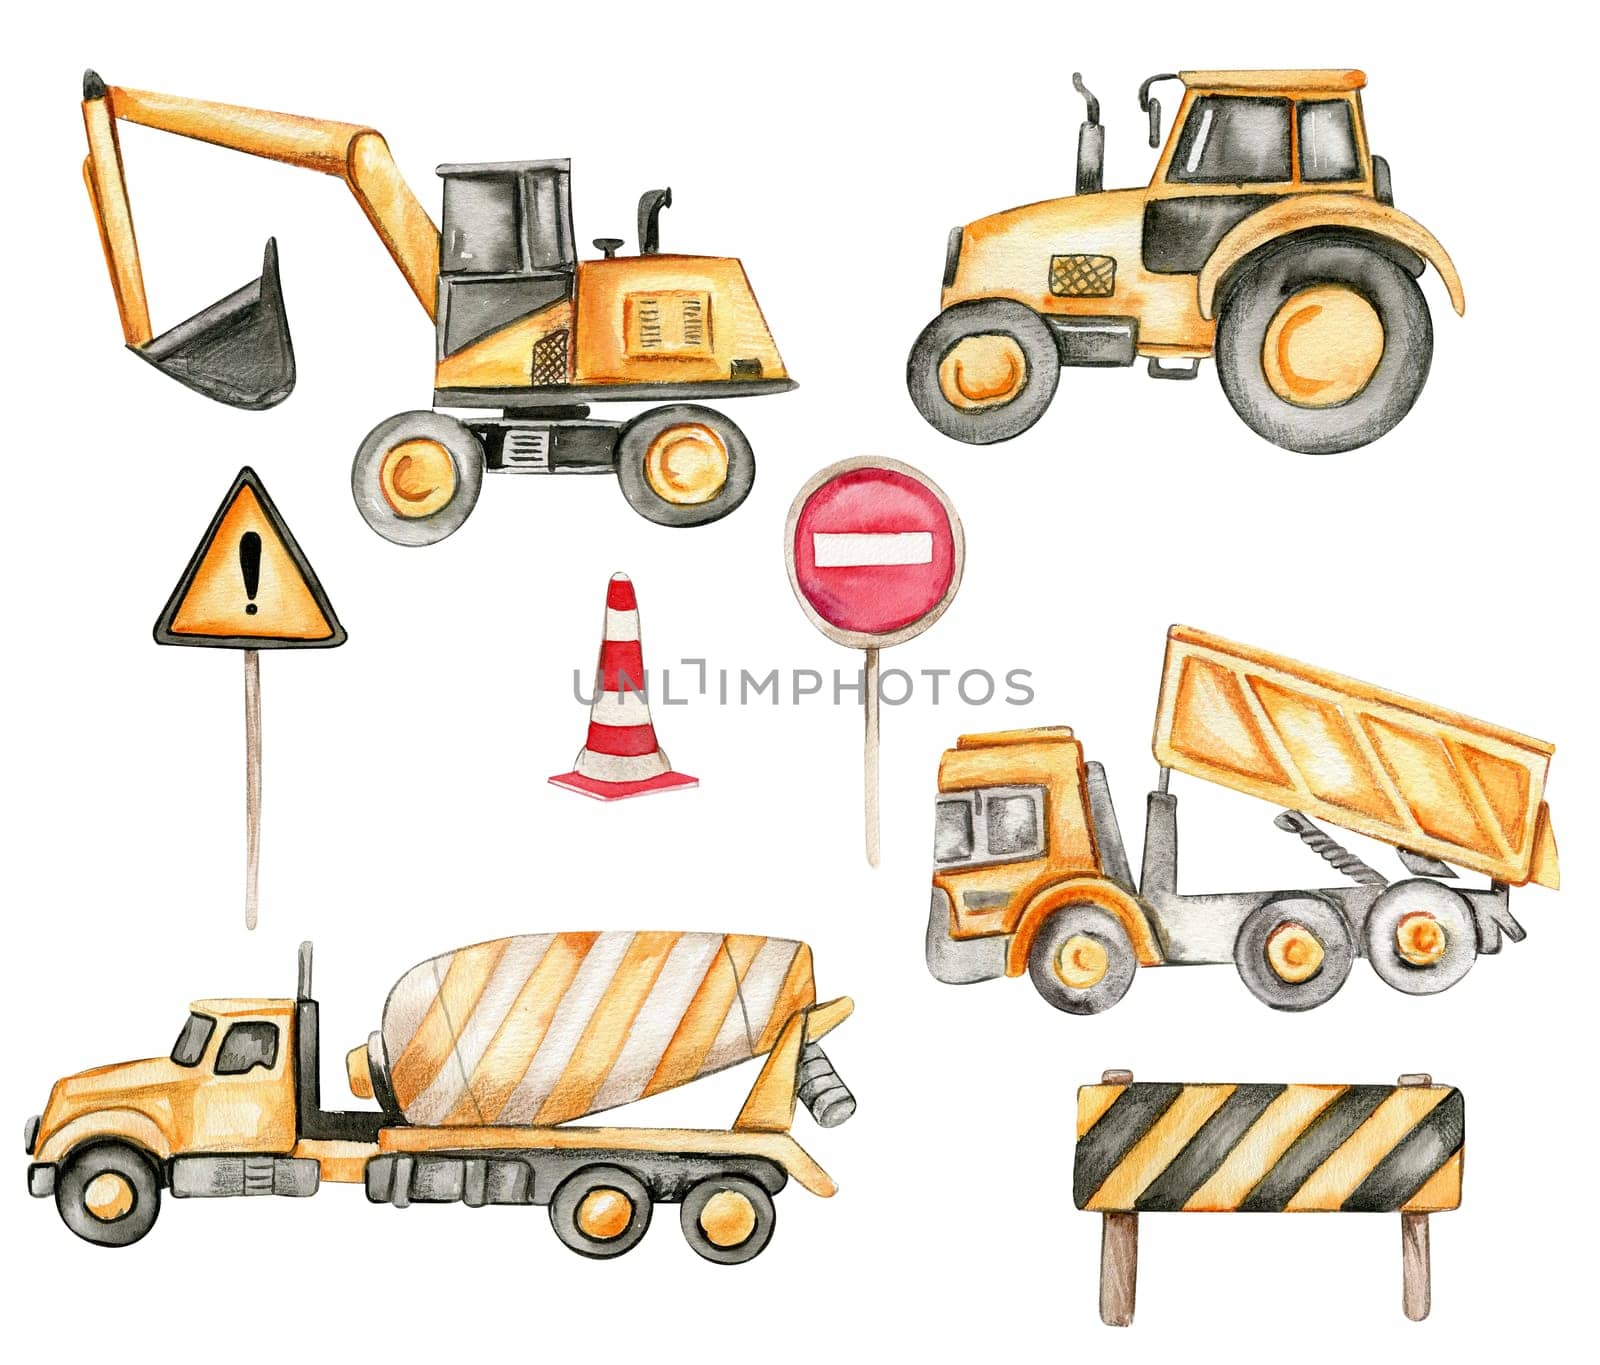 Road signs, yellow concrete mixer, tractor, truck and excavator. Watercolor hand drawn illustration. Perfect for kid posters or stickers.